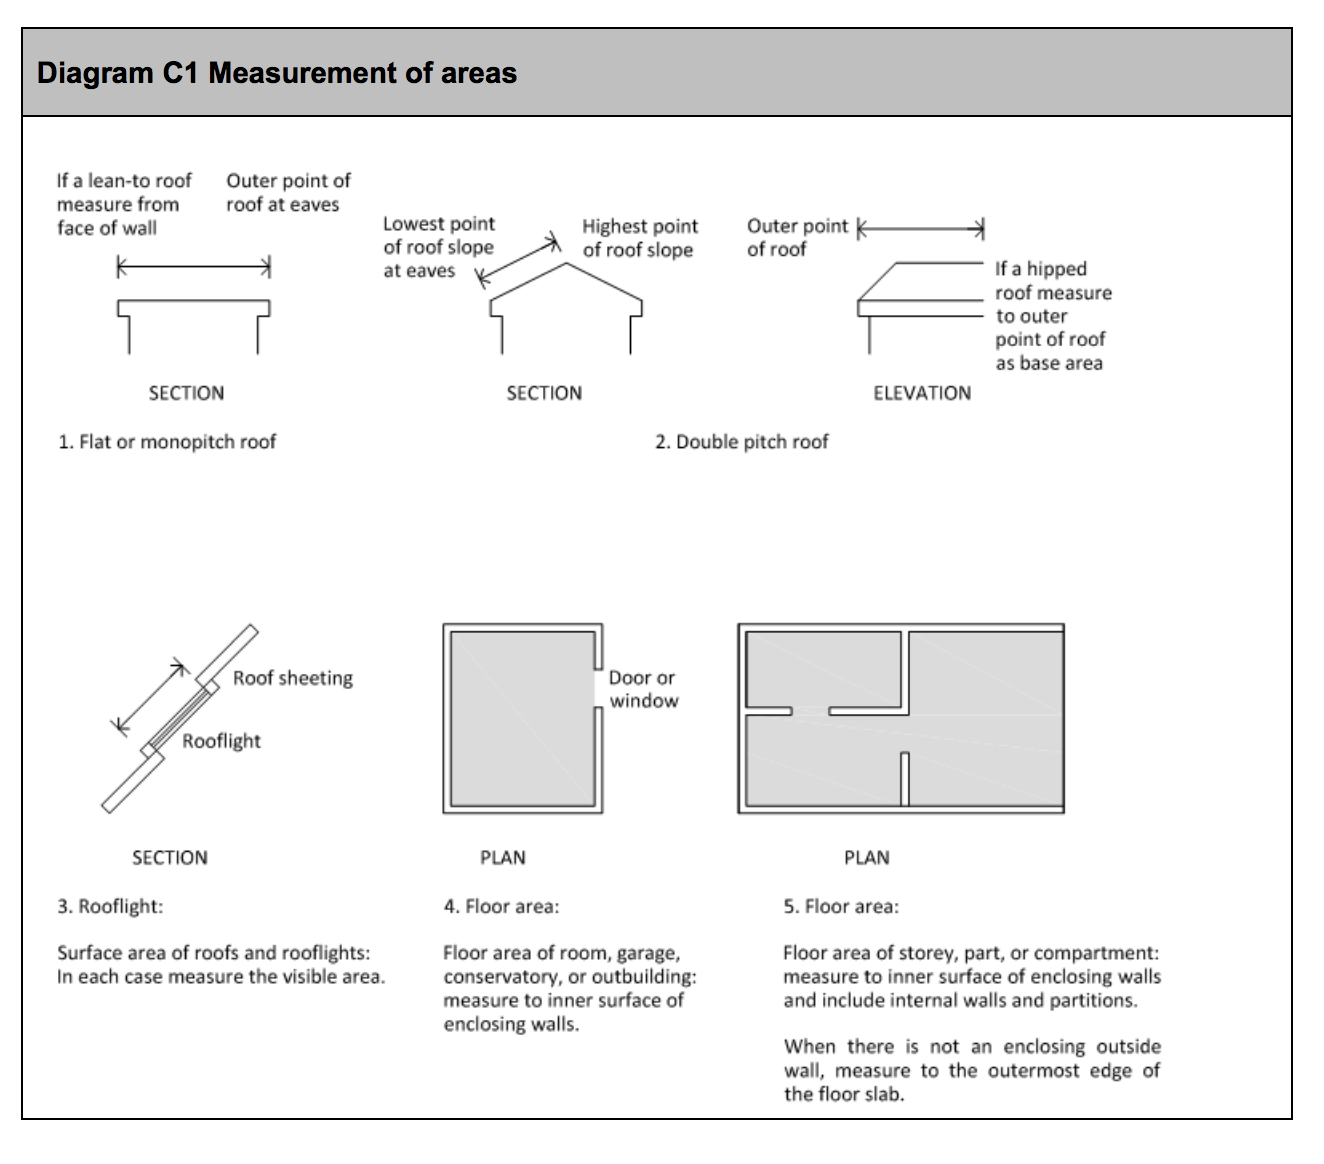 Diagram HB20 - Measurement of areas - Extract from TGD B Vol. 2